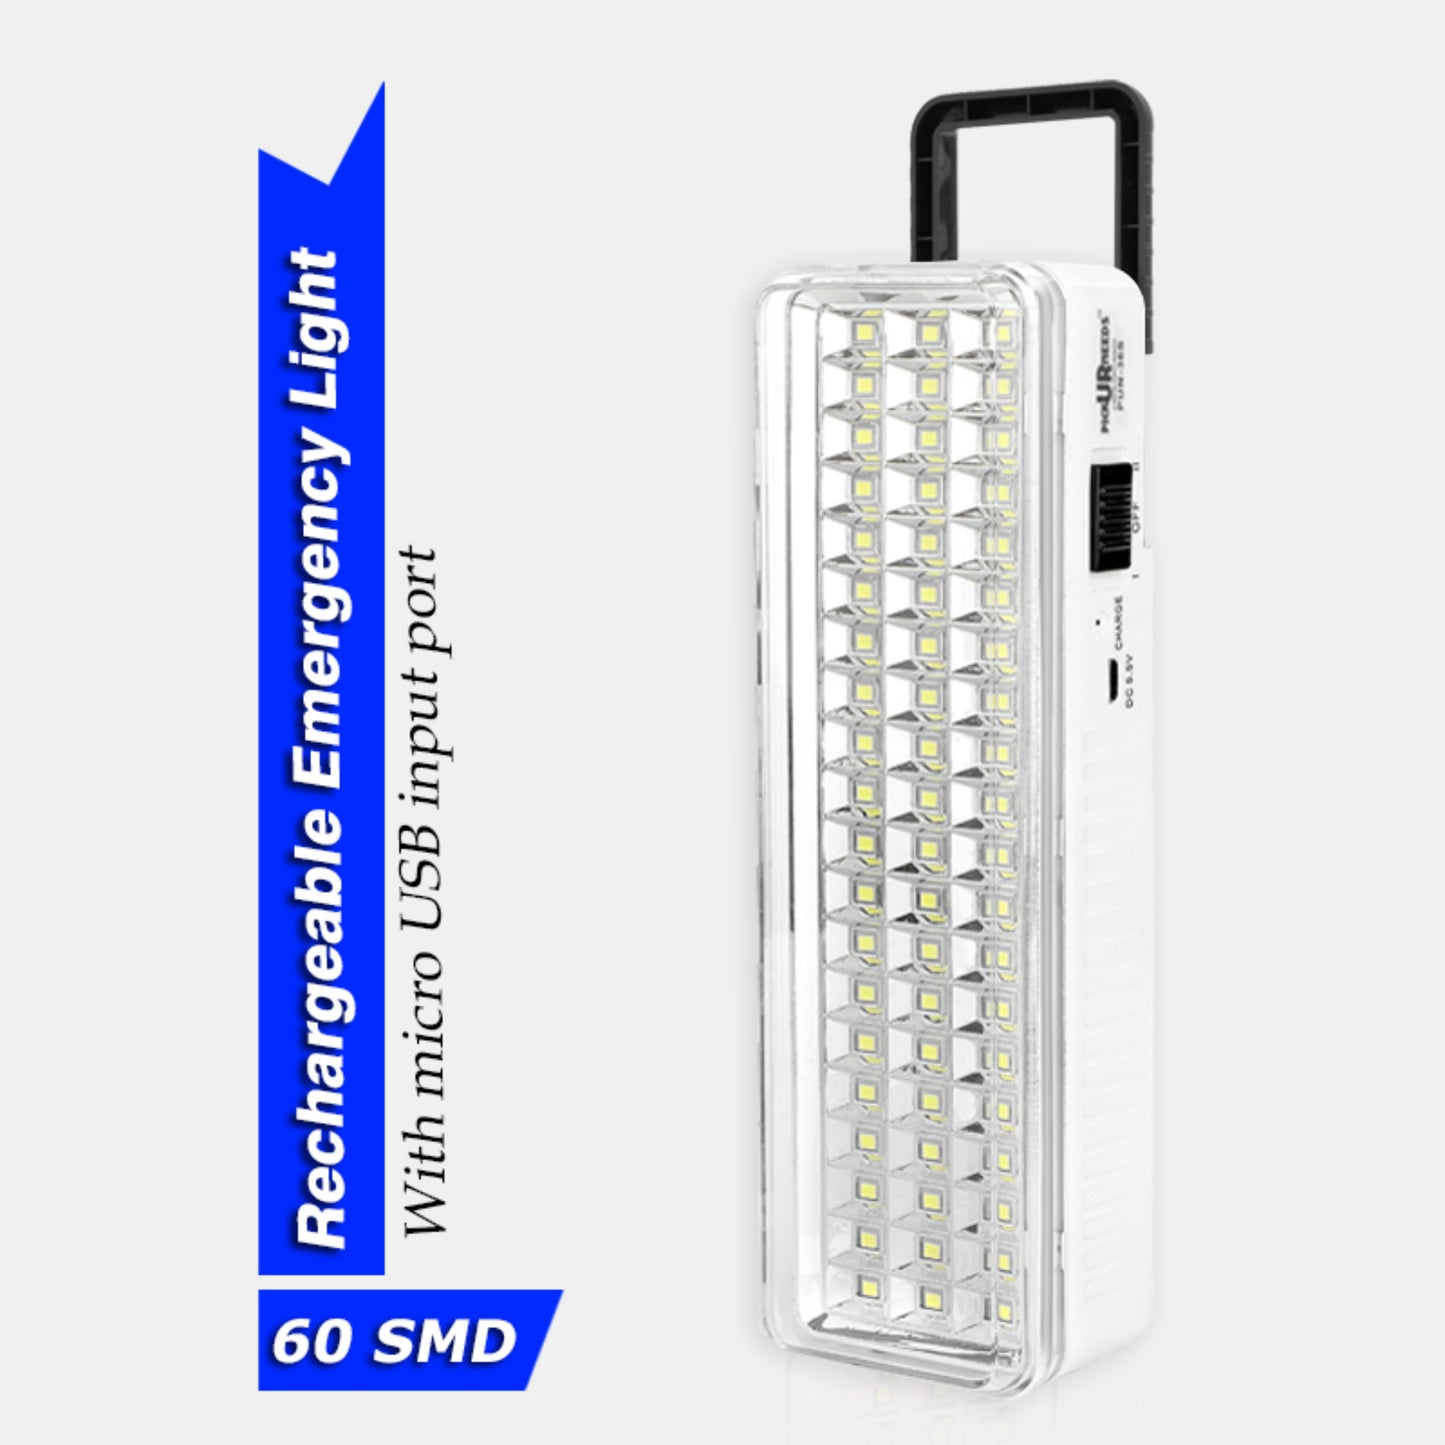 Pick Ur Needs High Quality 60 SMD LED Light with Android Charging Rechargeable Emergency Light